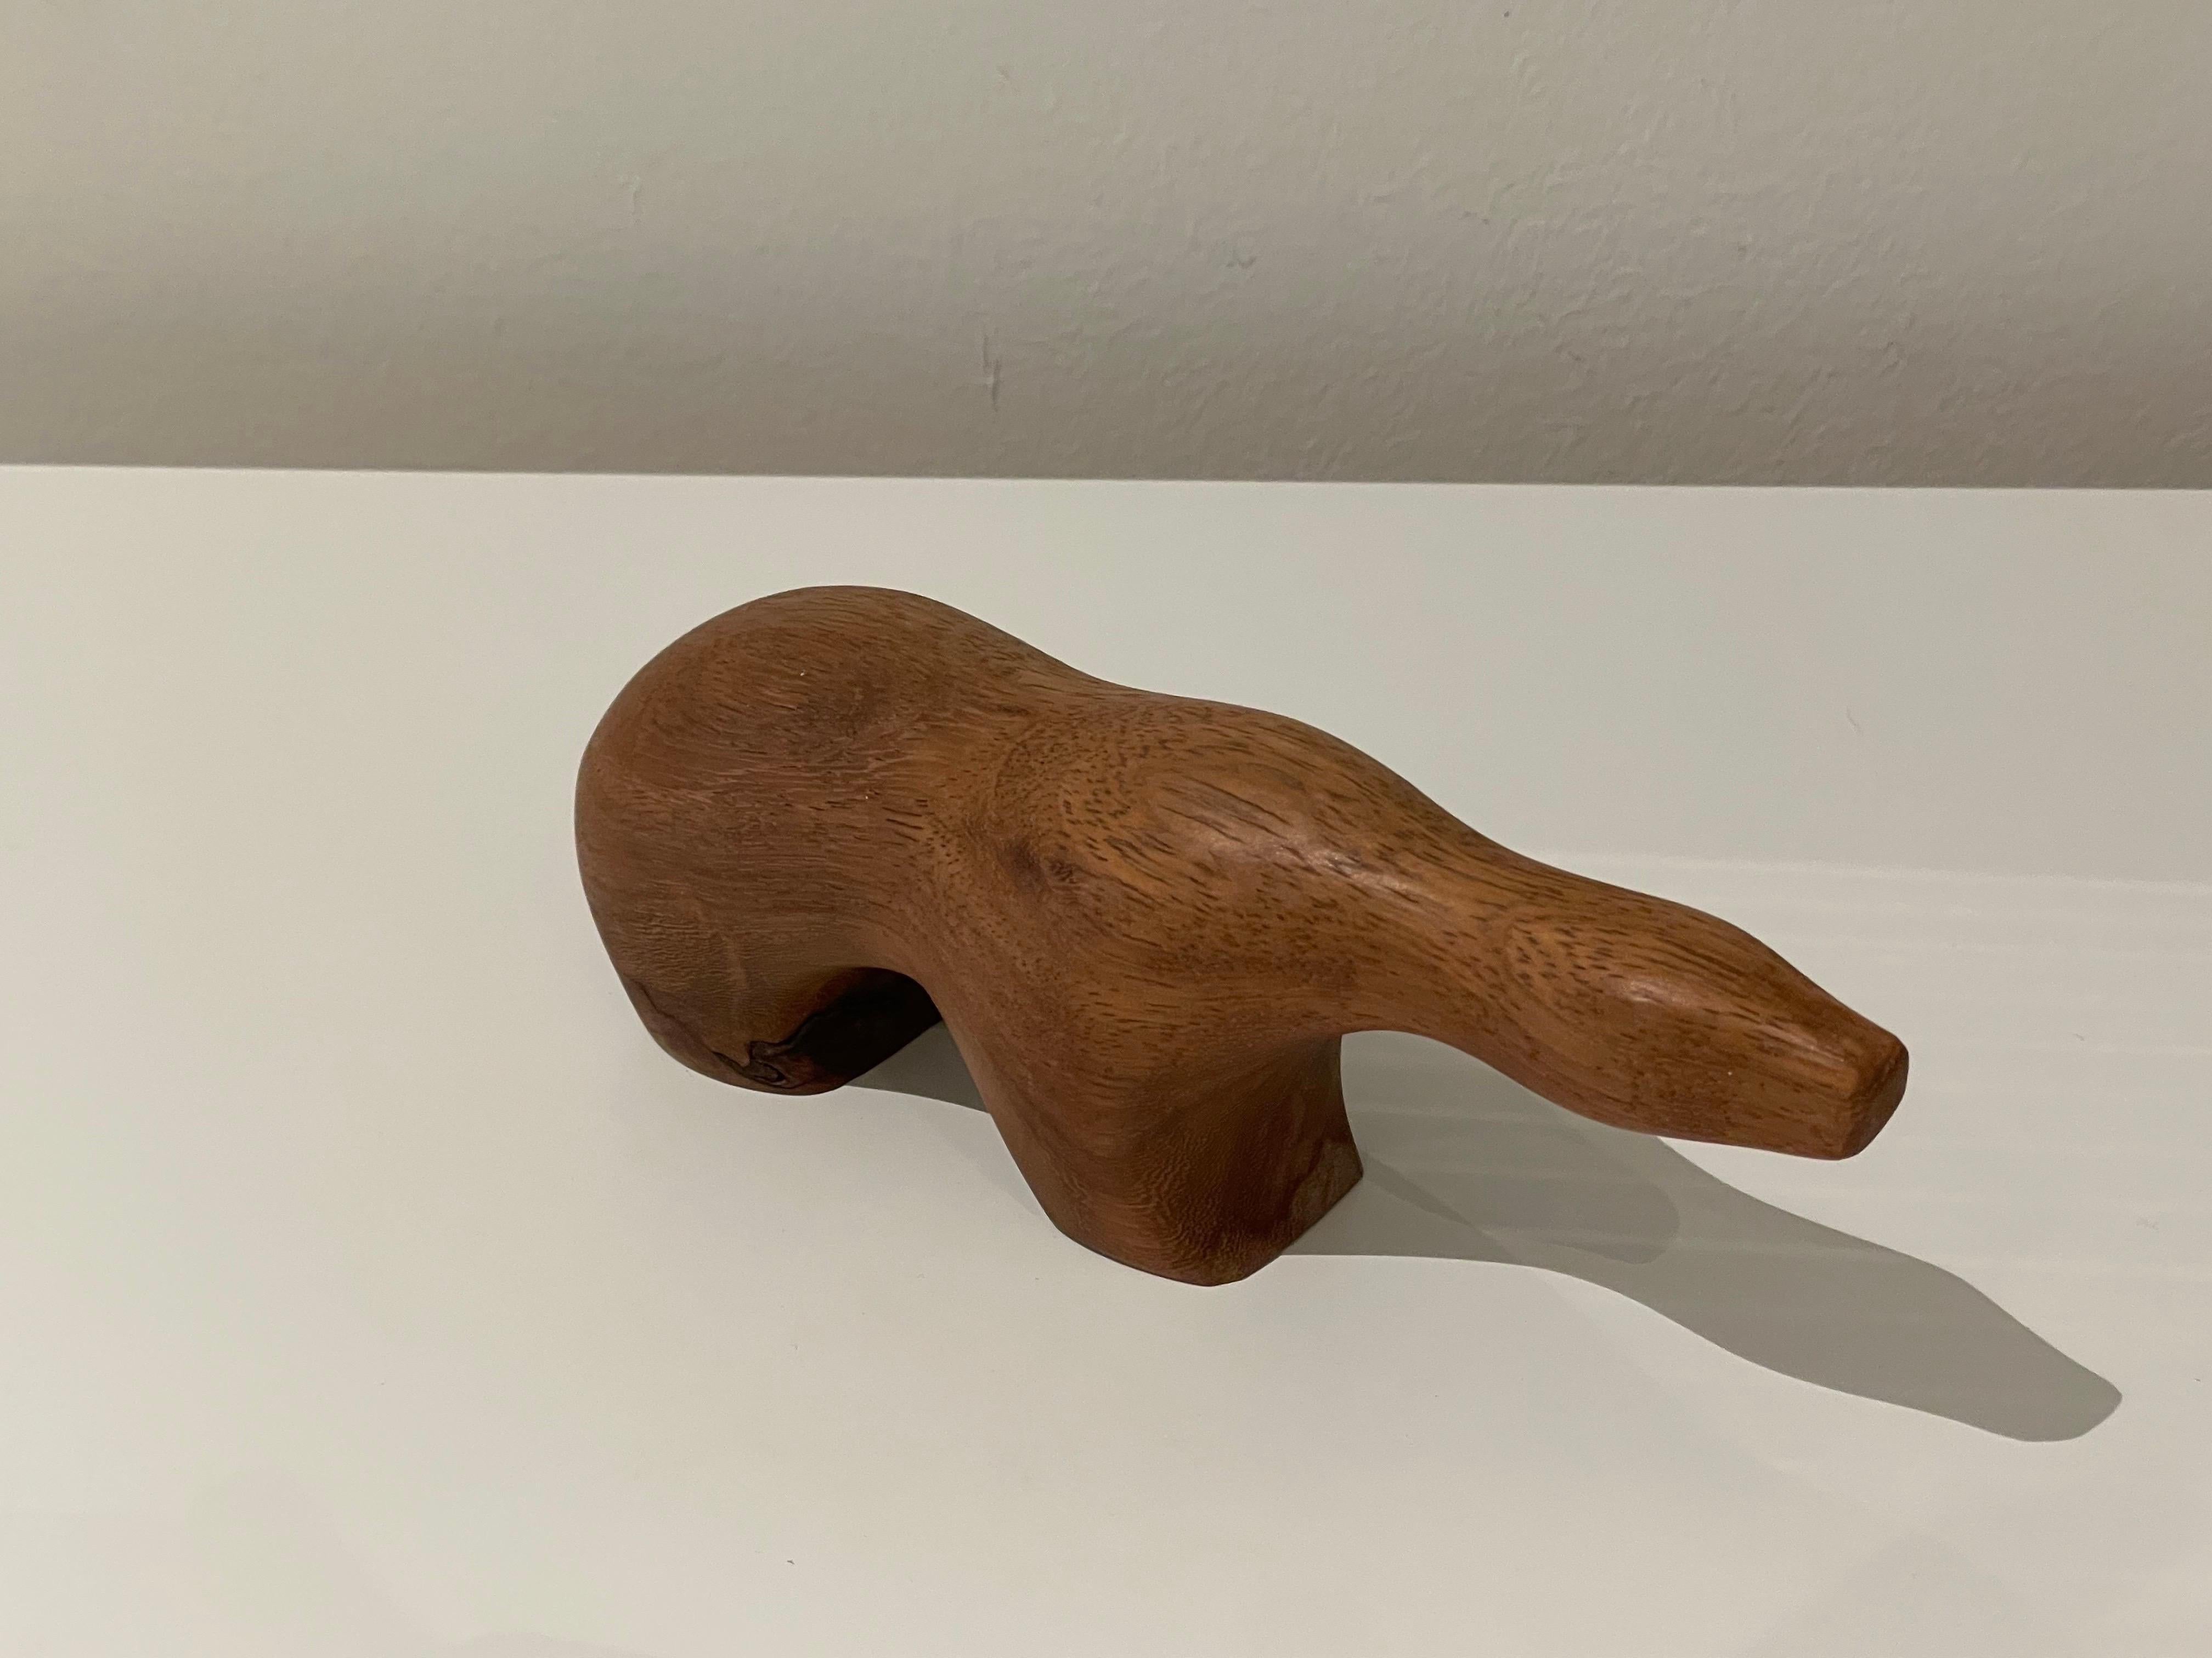 Mid- Century Modern Arne Tjomsland Polar Bear produced by Hiorth & Østlyngen in the mid 50.

Arne Tjomsland was one of Norway’s foremost souvenir designers in the 1950s and 60s. His designs were based on the theme of Nordic fauna; including animals,